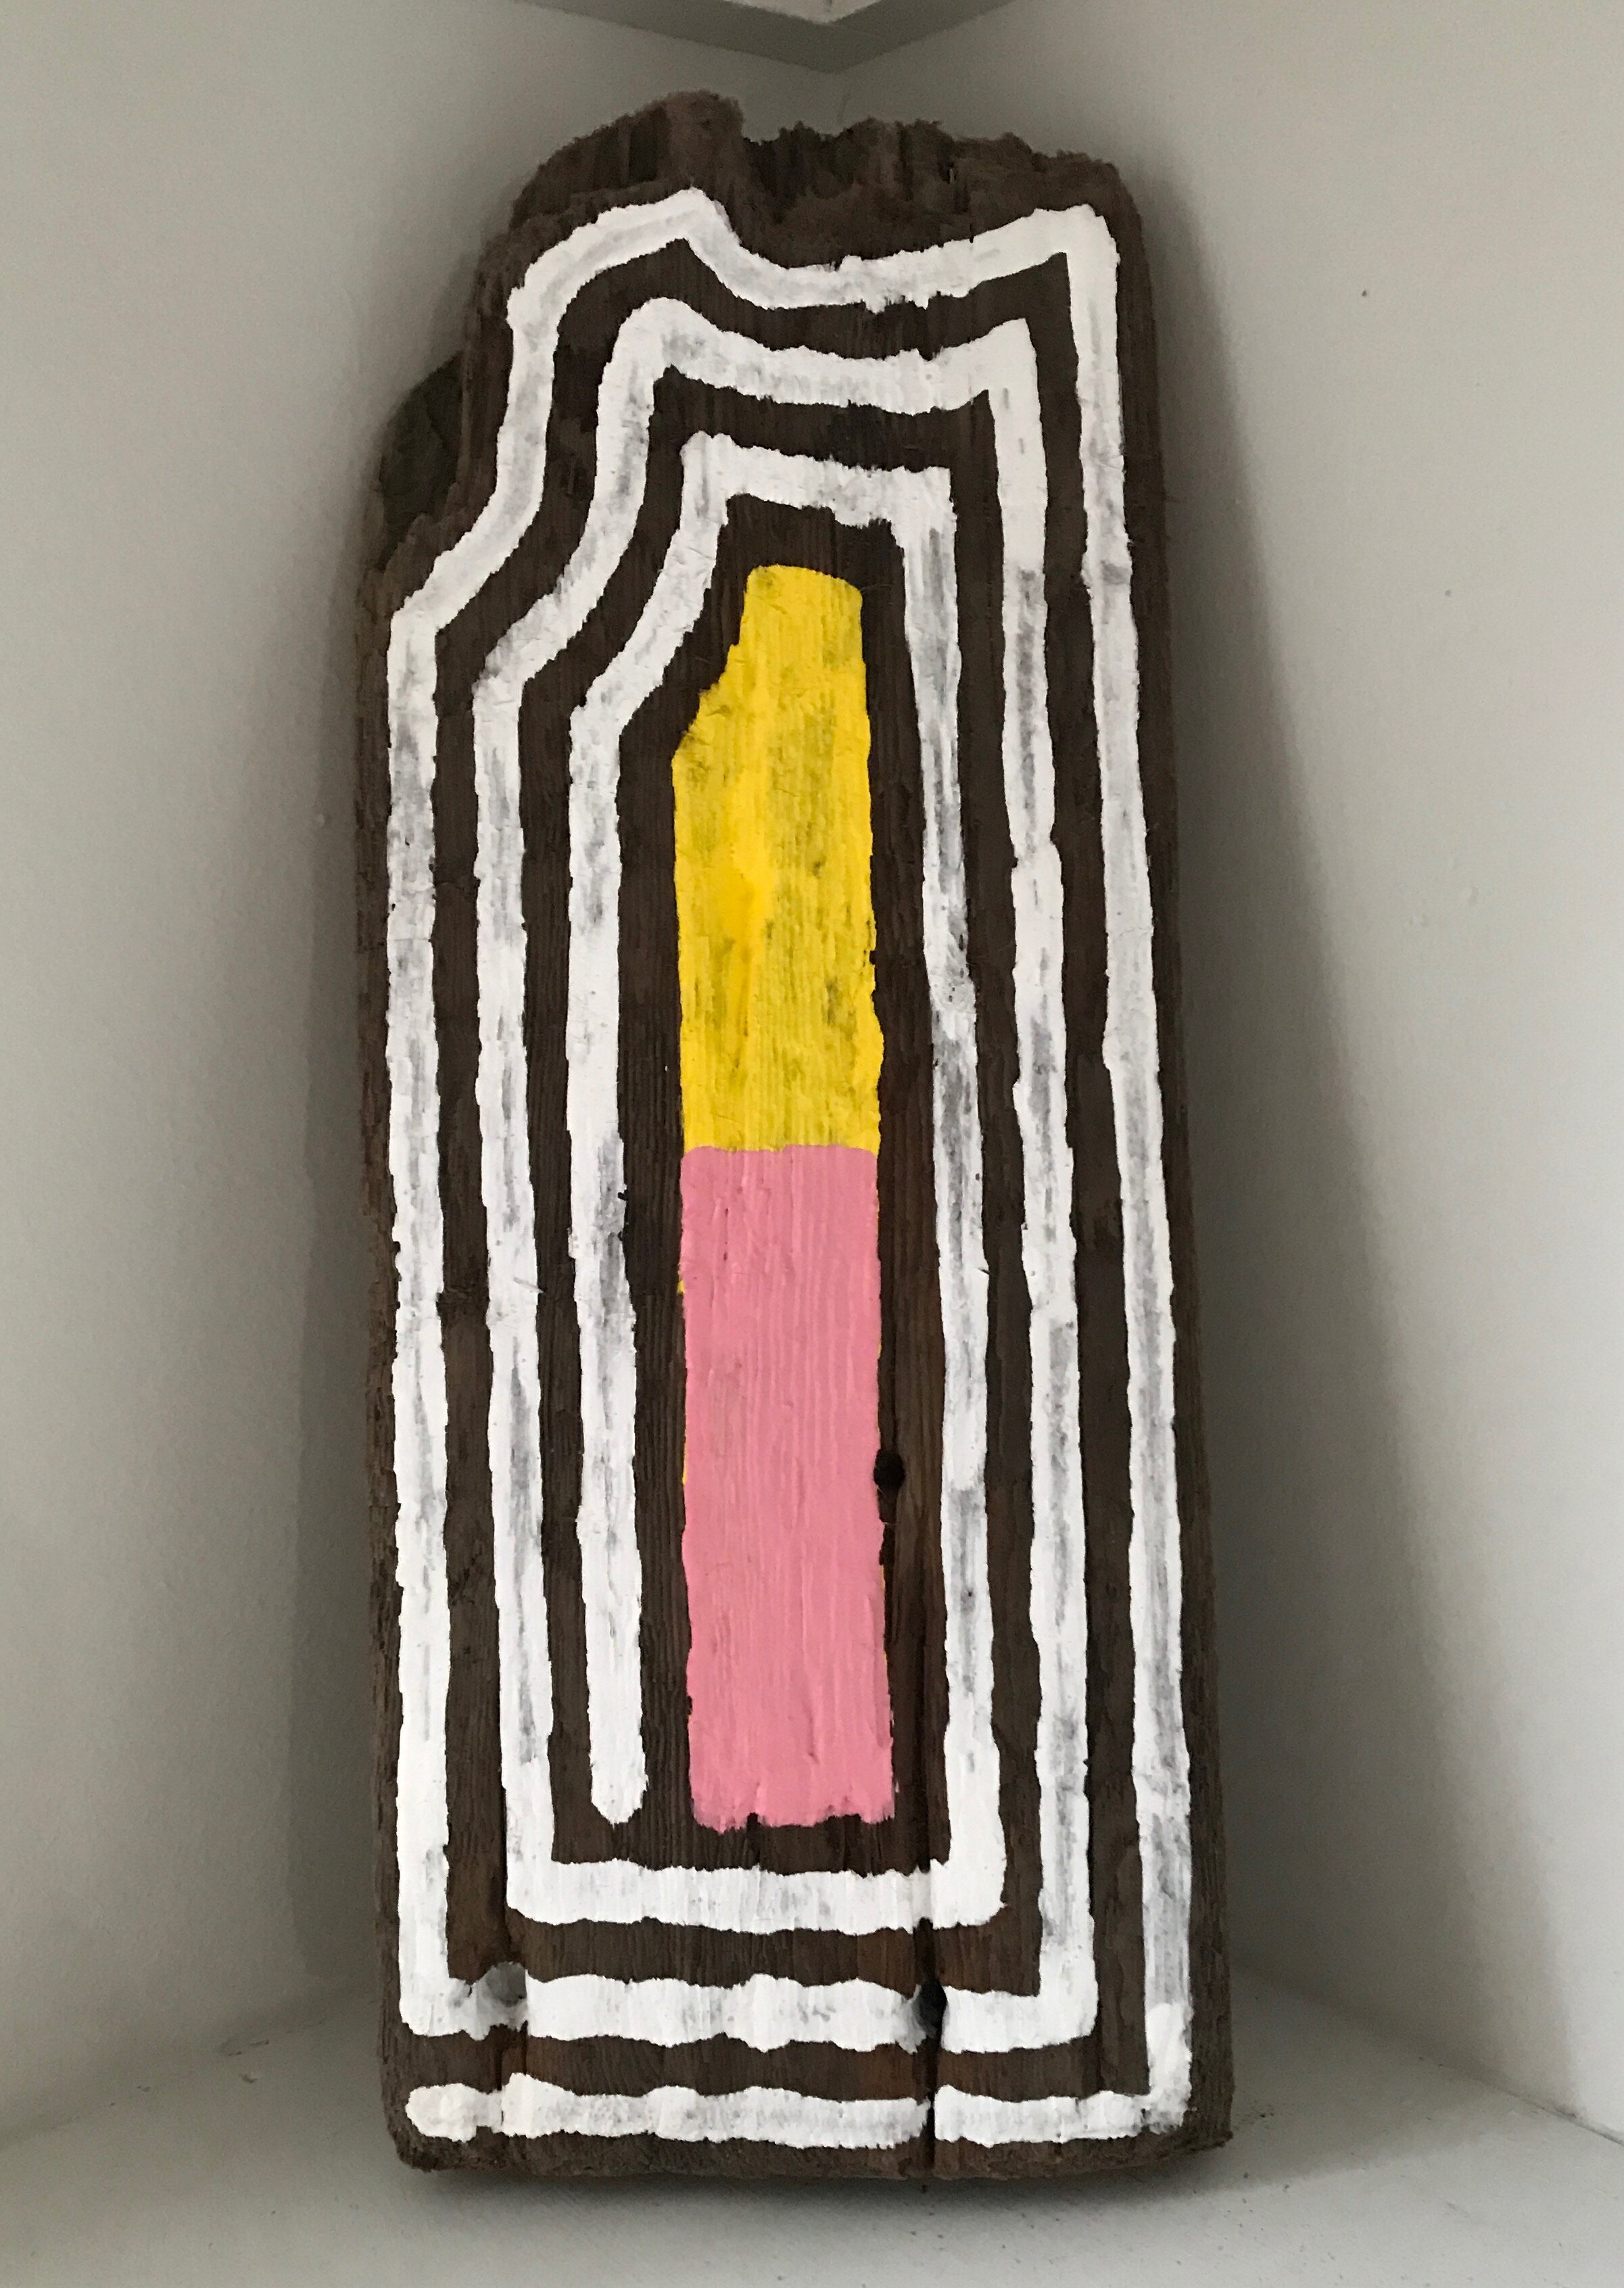 Untitled (frequency and balance), 2020, acrylic on found wood from Rockaway Beach, 14 x 5.5 x 2.5 inches